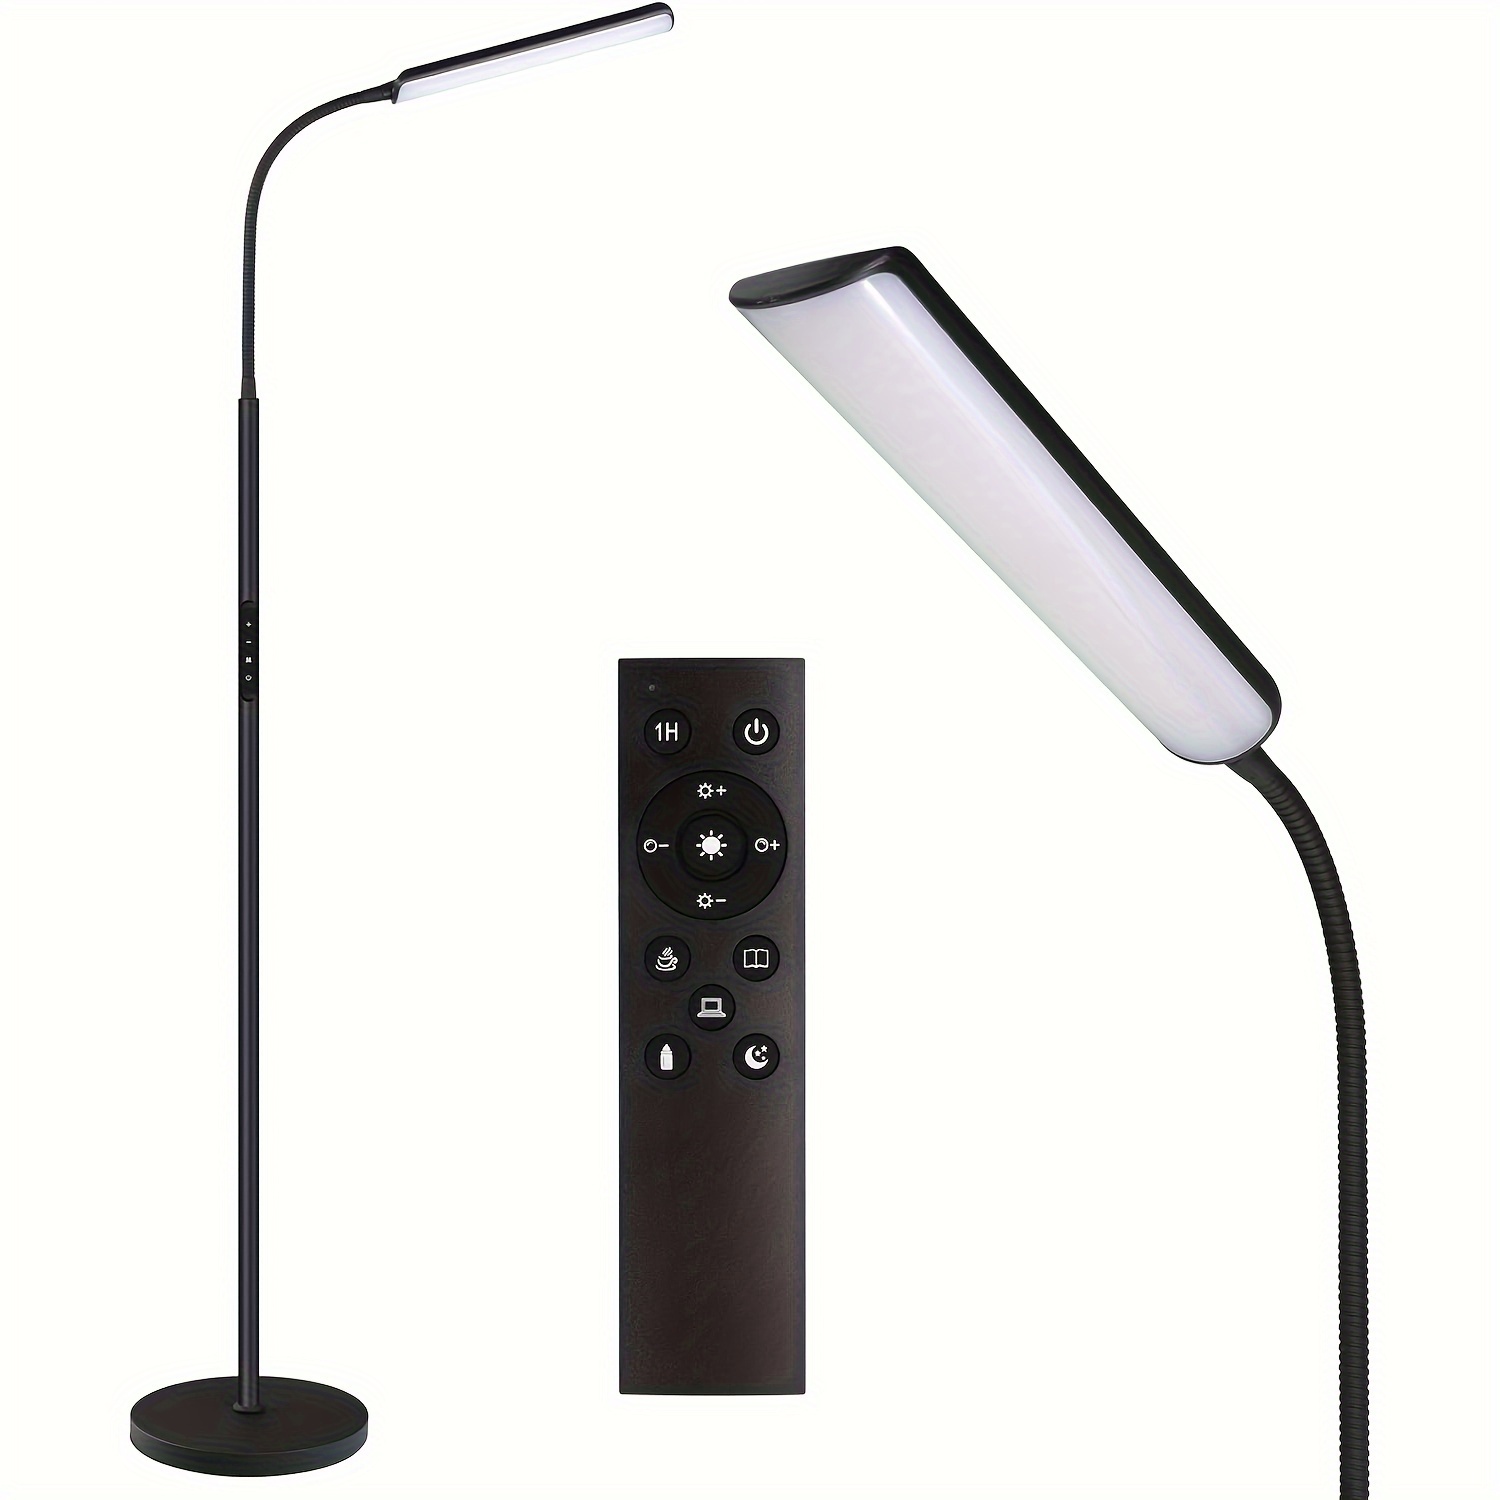 

Led Floor Lamp, Bright 15w Floor Lamps For Living Room With 1h Timer, Stepless Adjustable 3000k-6000k Colors & Brightness Standing Lamp With Remote & Touch Control Reading Floor Lamps